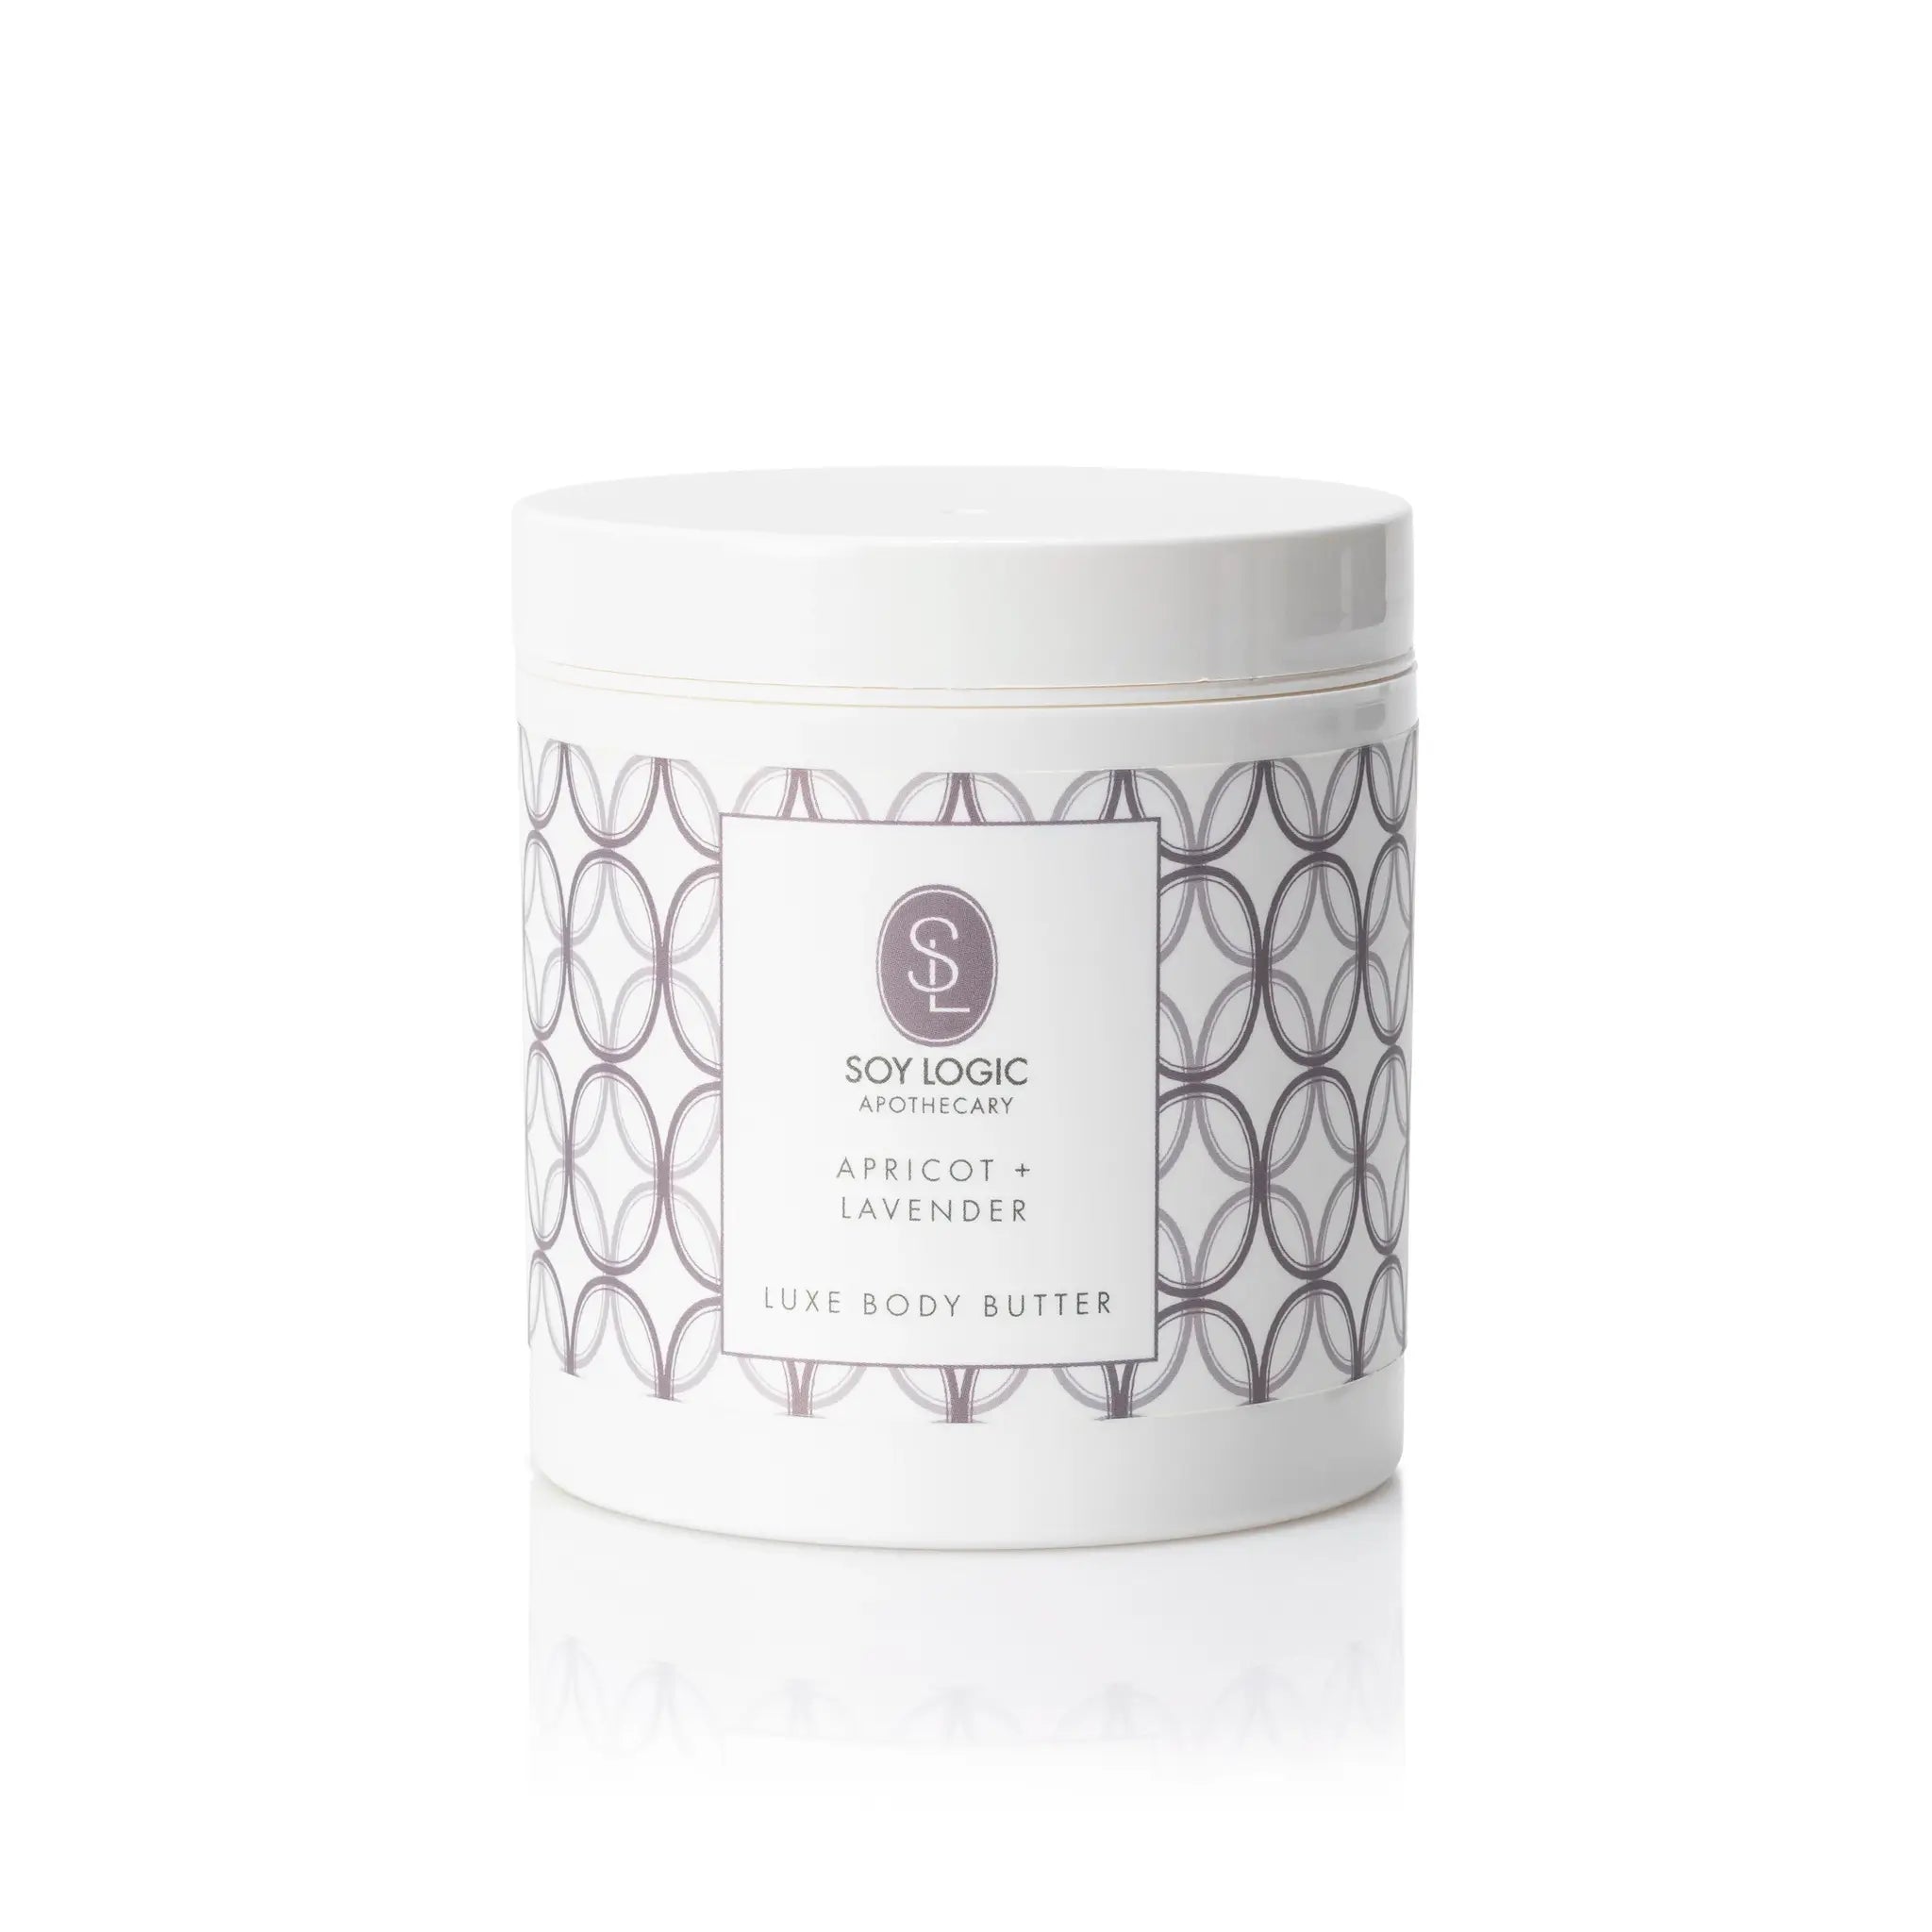 Apricot & Lavender Soy Logic Luxe Body Butter